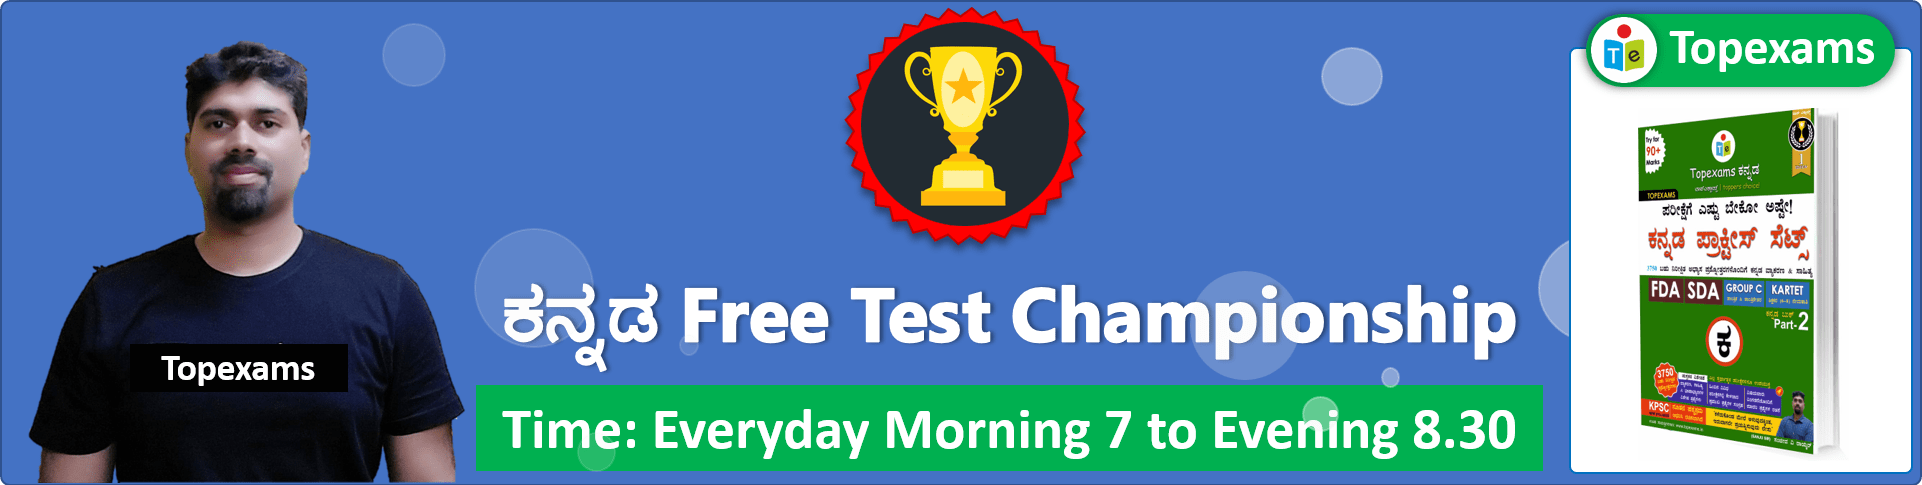 You are currently viewing Test-7 ಕನ್ನಡ Championship  For SDA, FDA, Group C, KARTET